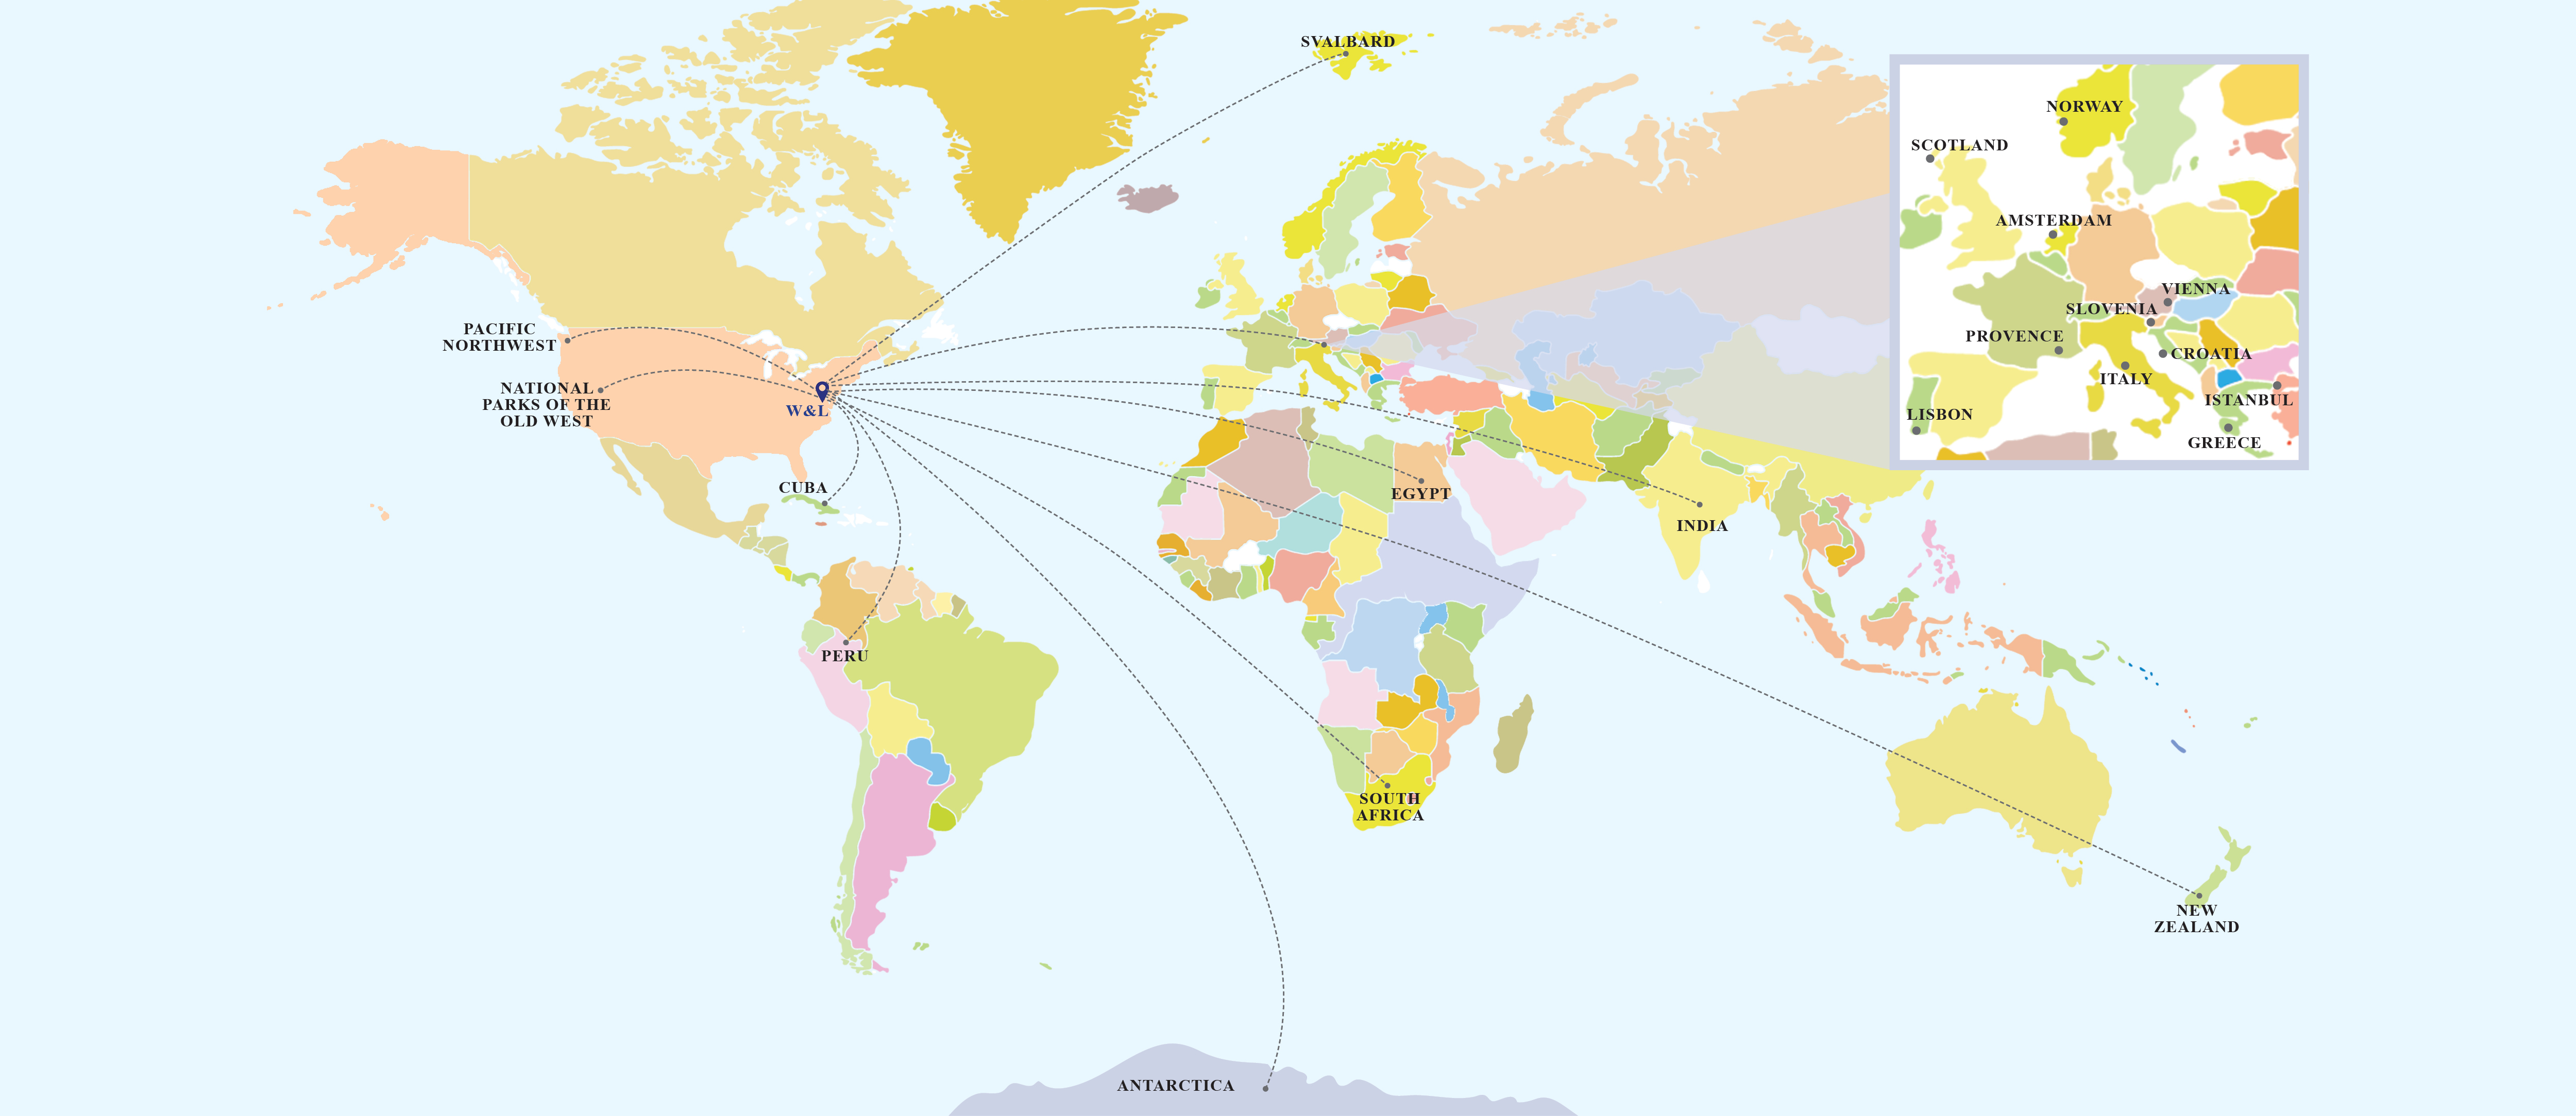 Image of map showing different Travel Program destinations